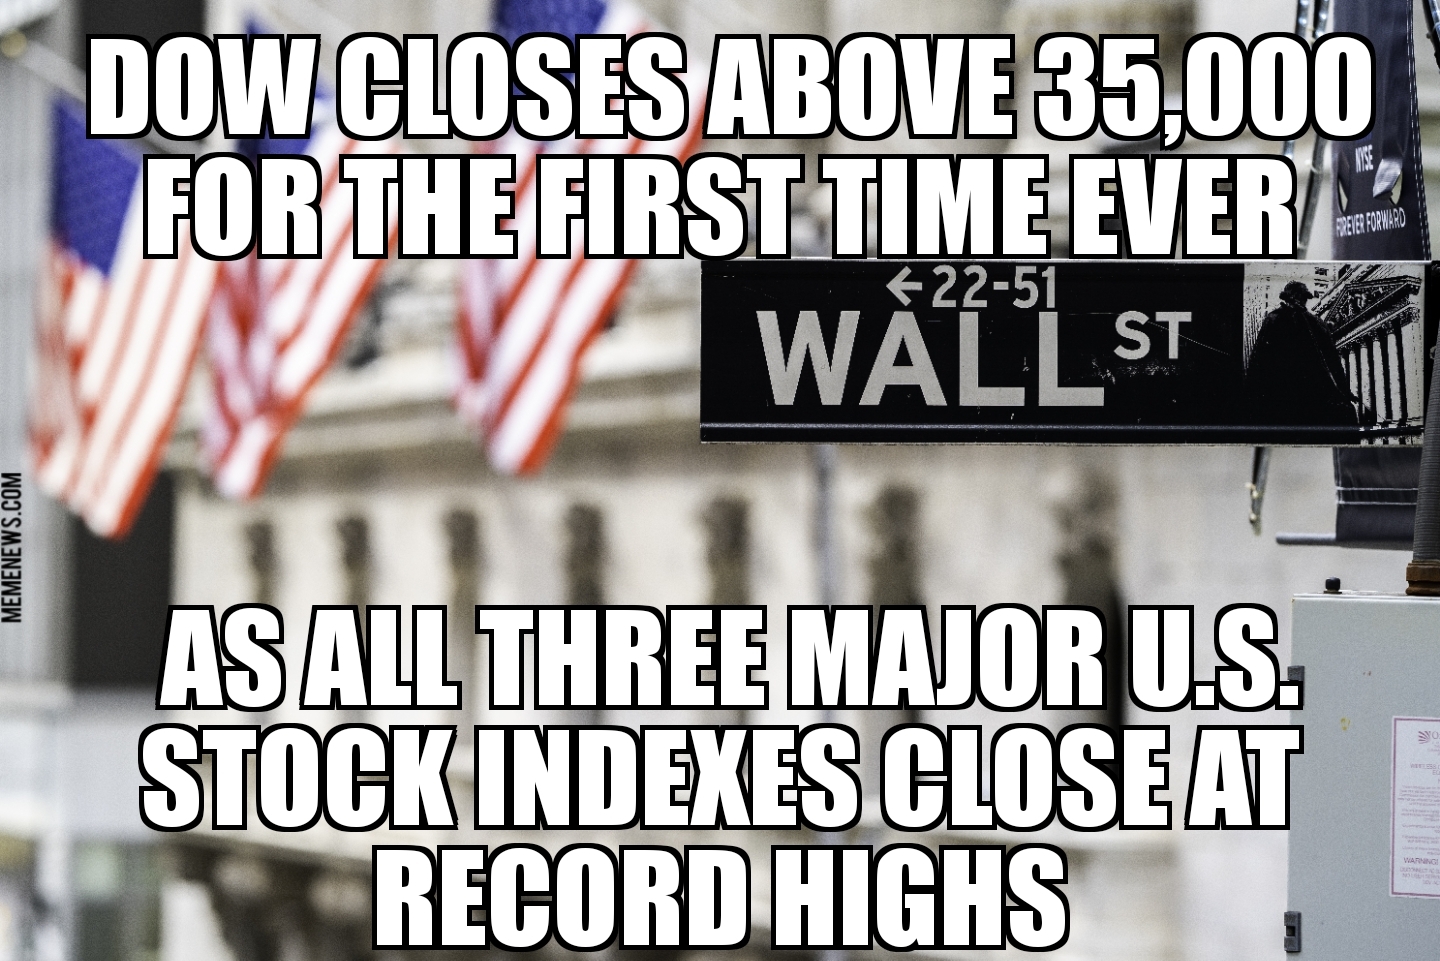 Dow closes above 35,000